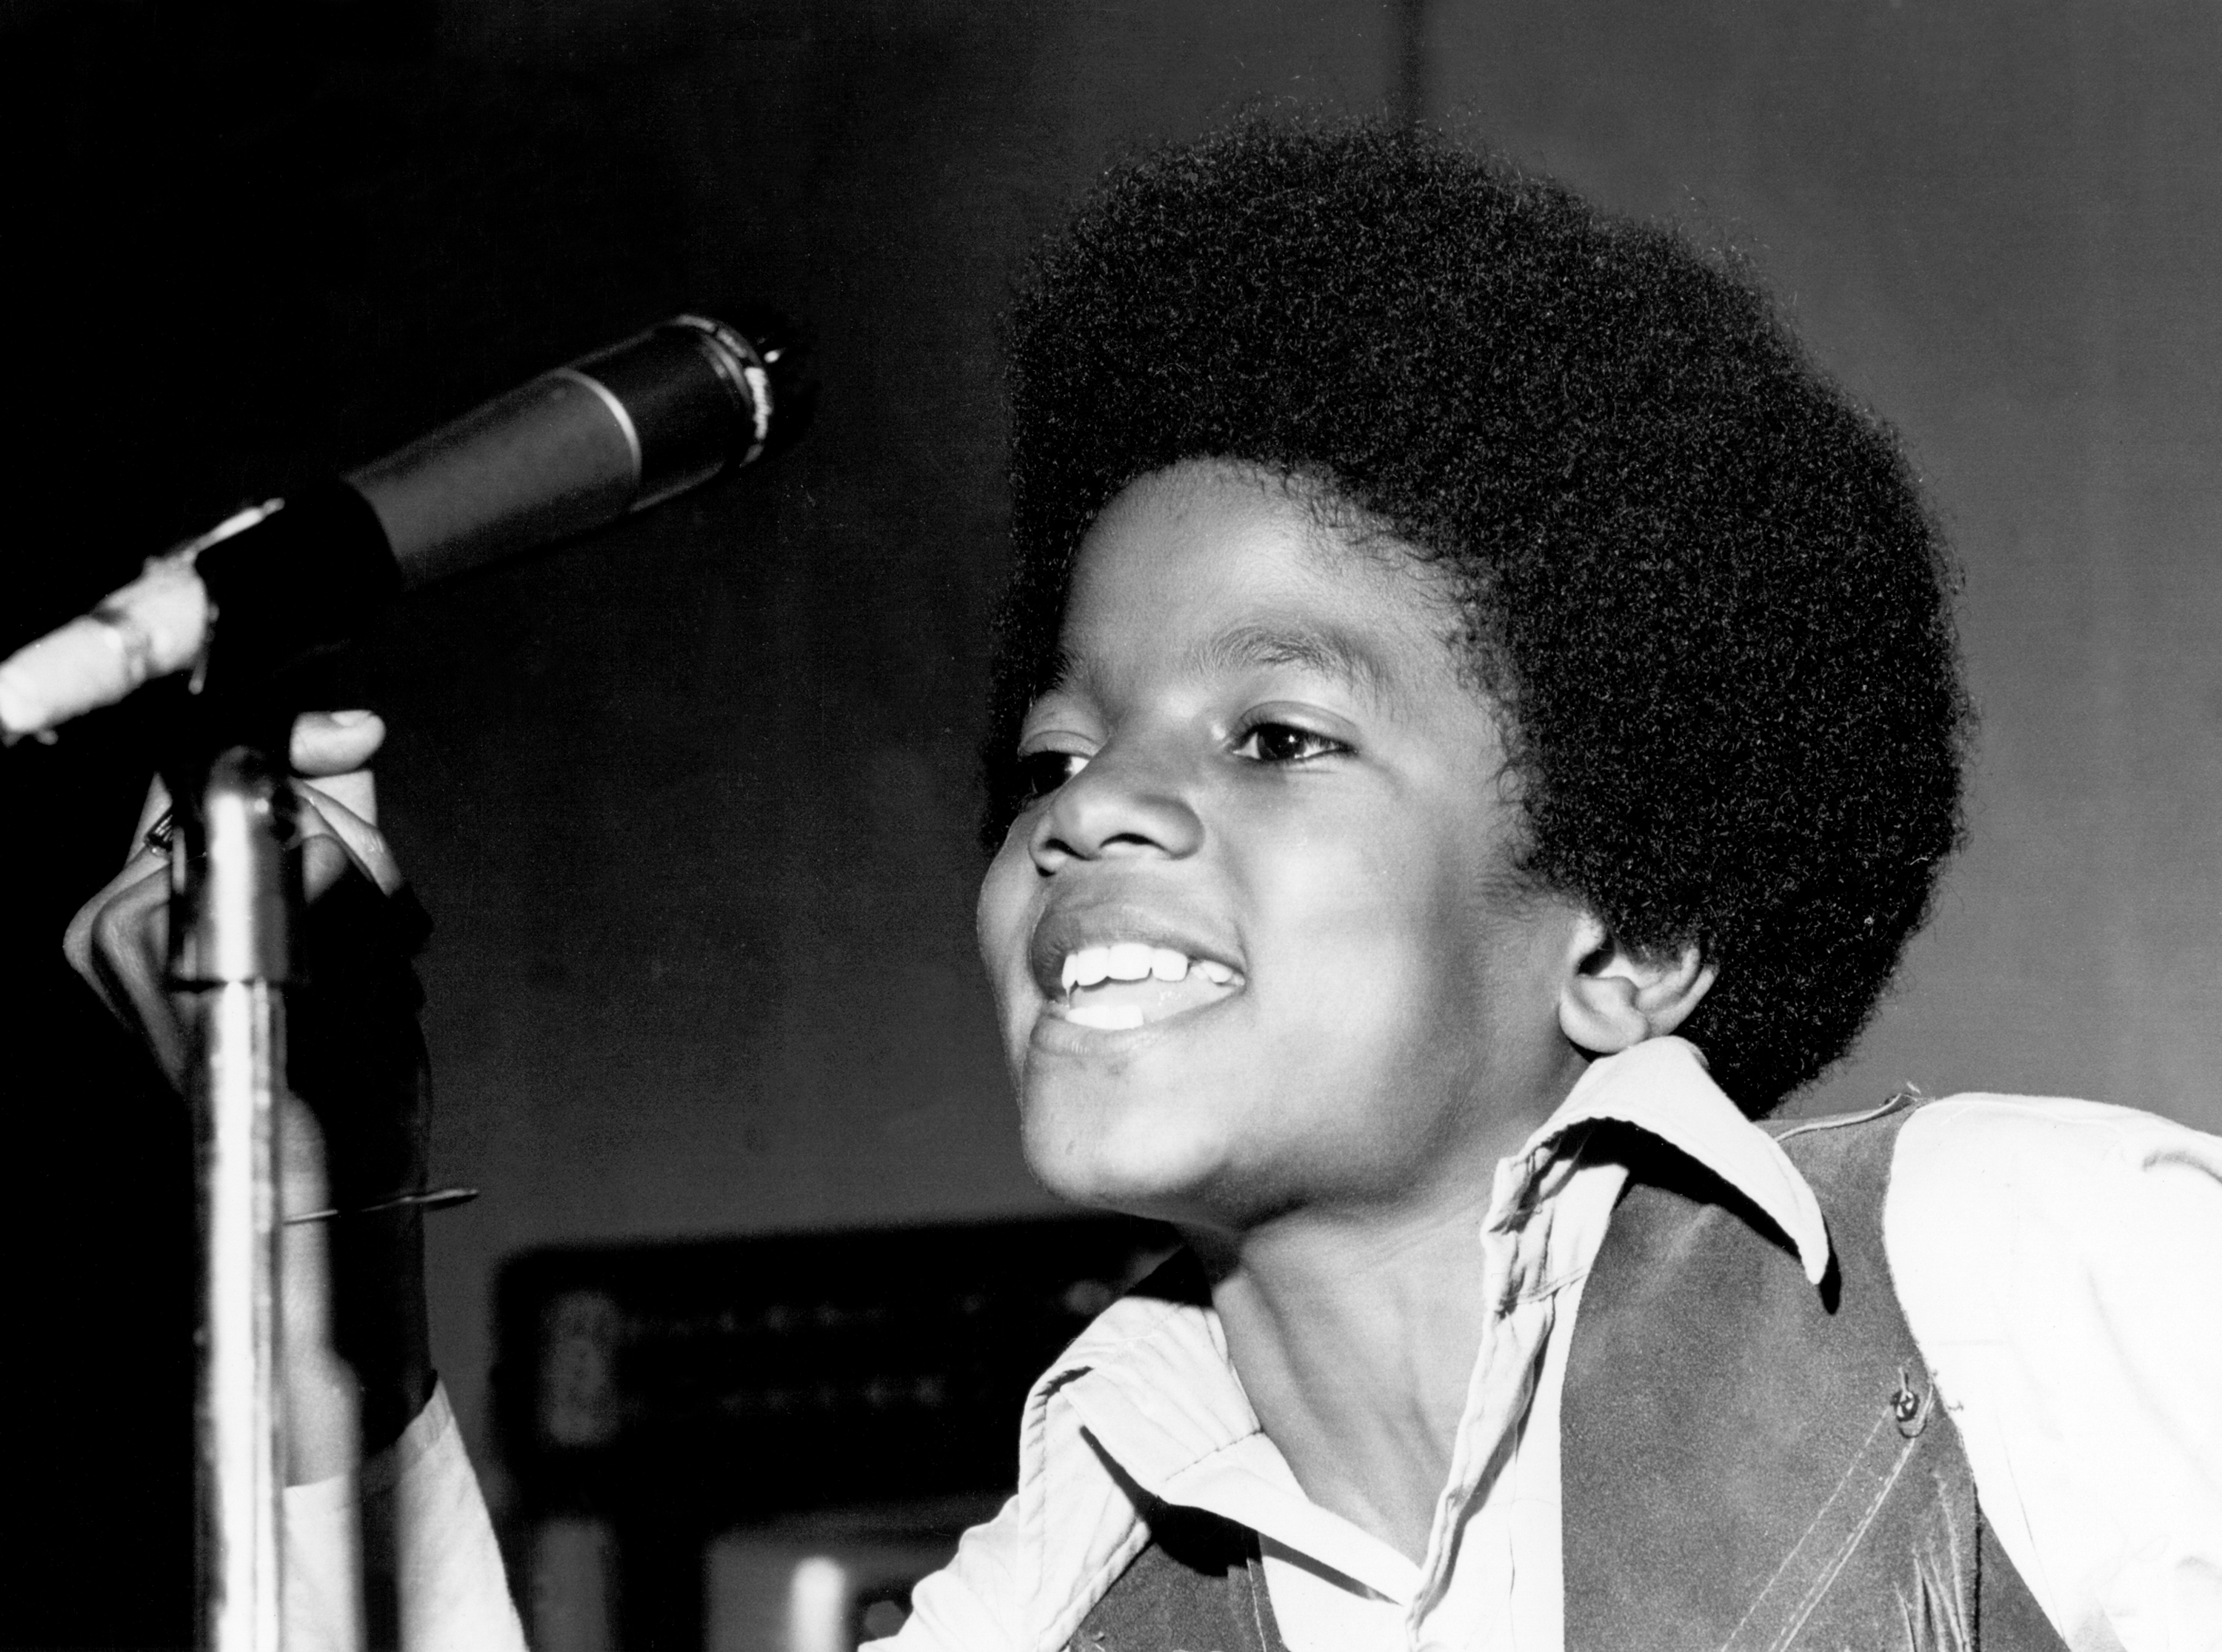 Michael Jackson vers 1970 | Source : Getty Images